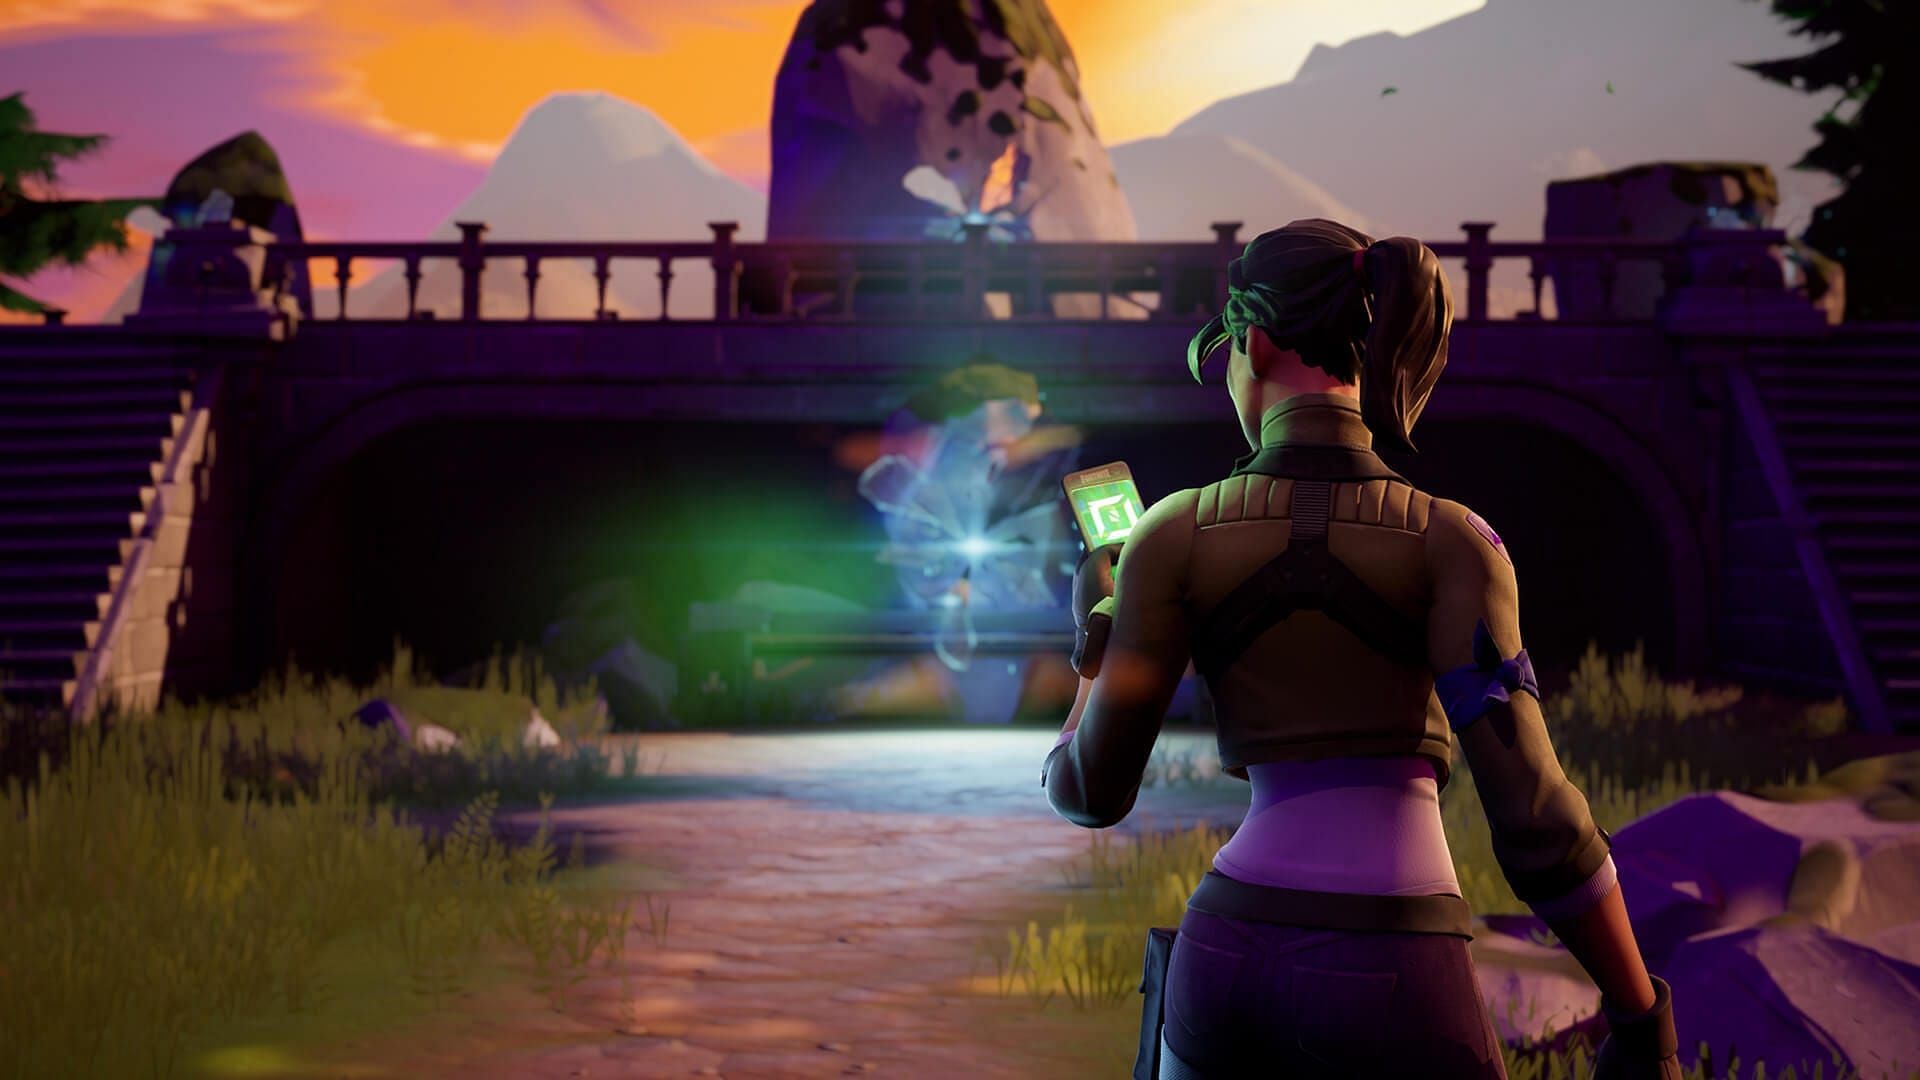 Creative 2.0 will also be released with the upcoming Fortnite season. (Image via Epic Games)